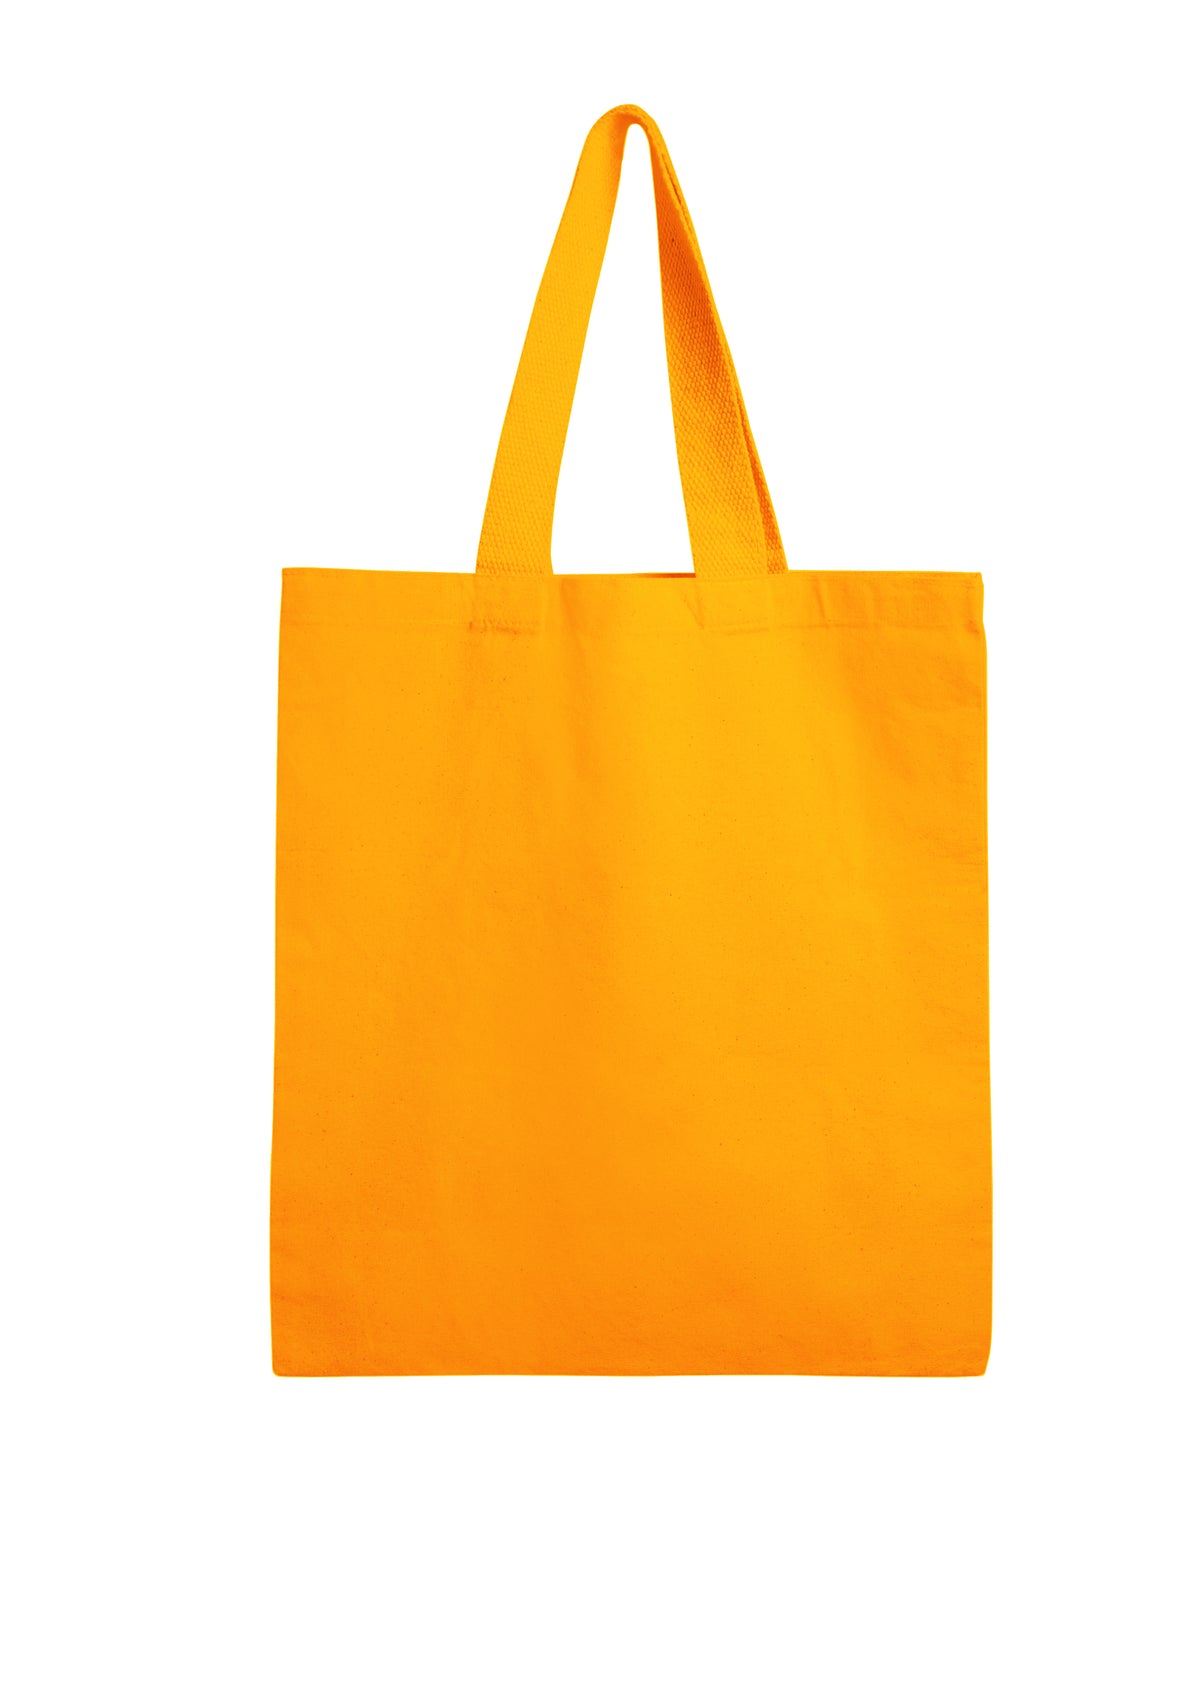 Blank Bags and Totes for Crafting / HTV Blanks